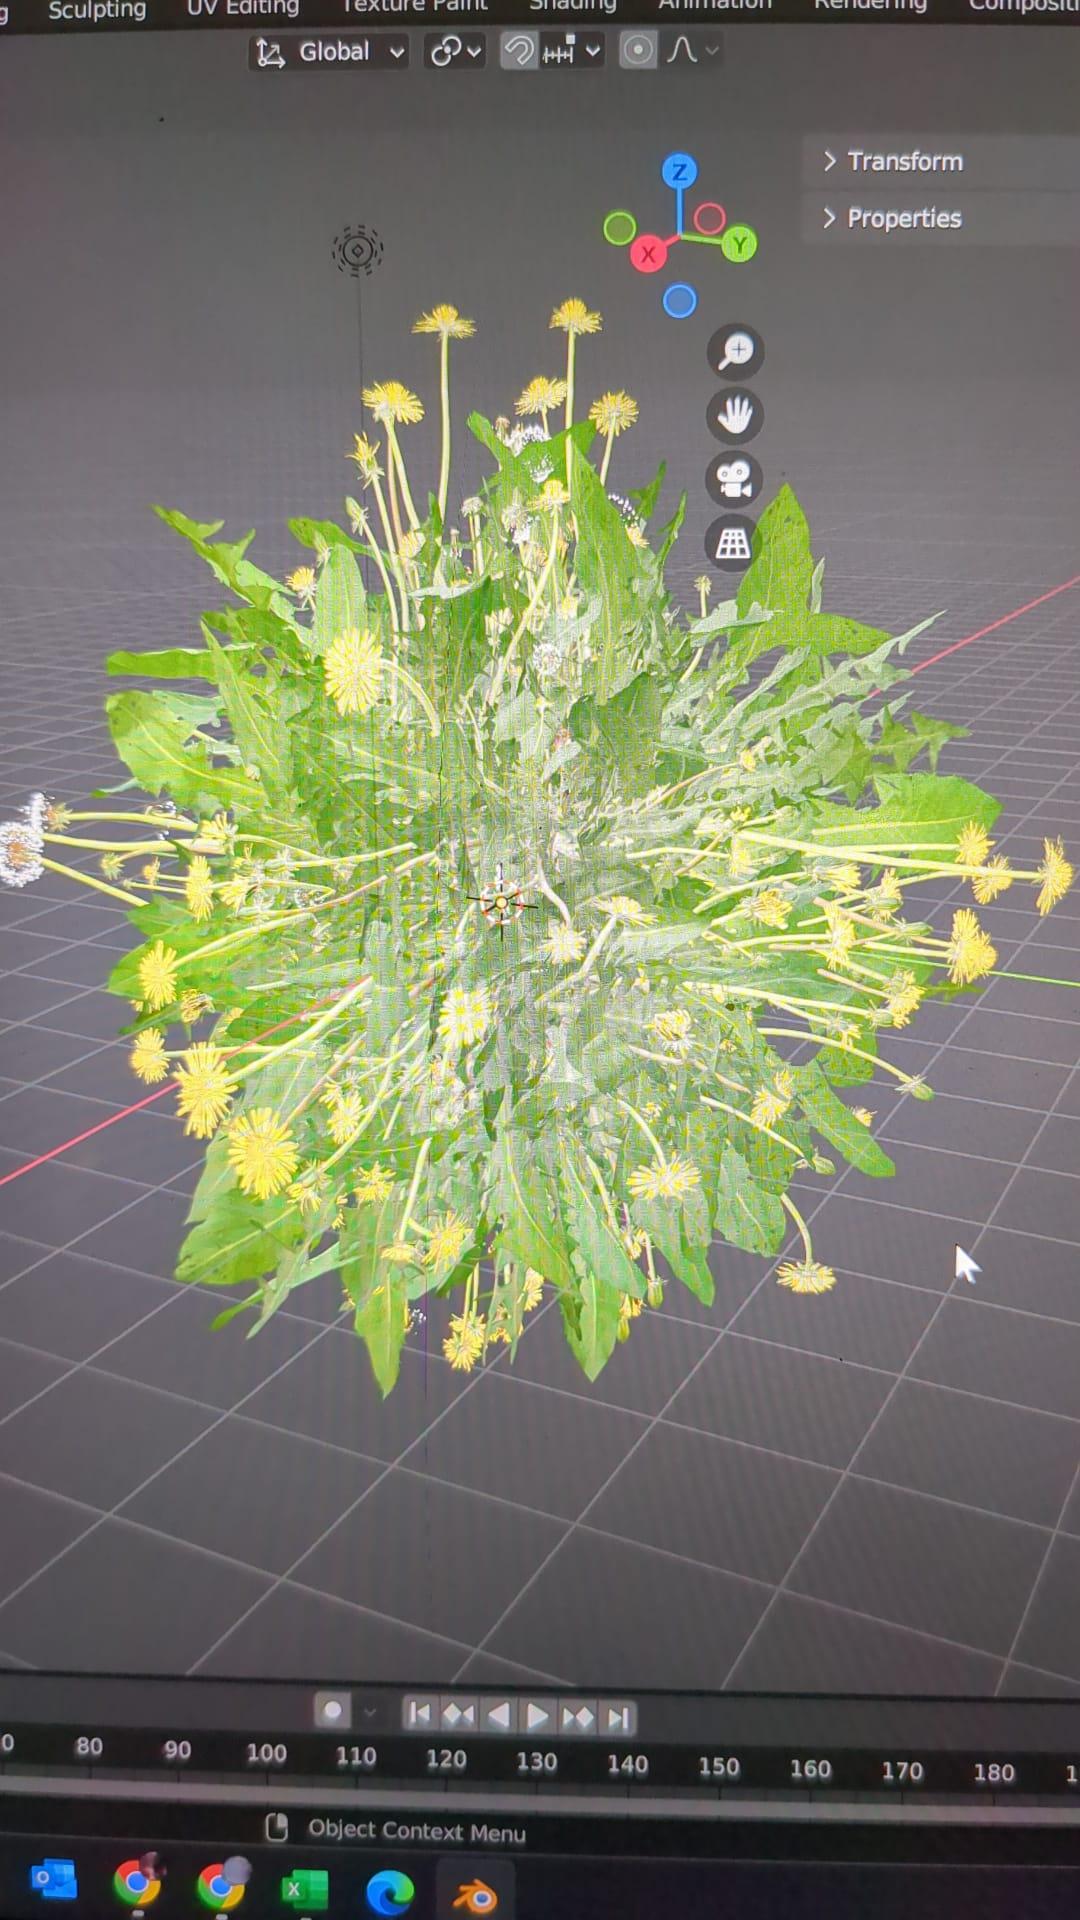 Photo by eo Studios. Rendering model of a fern with yellow flowers.